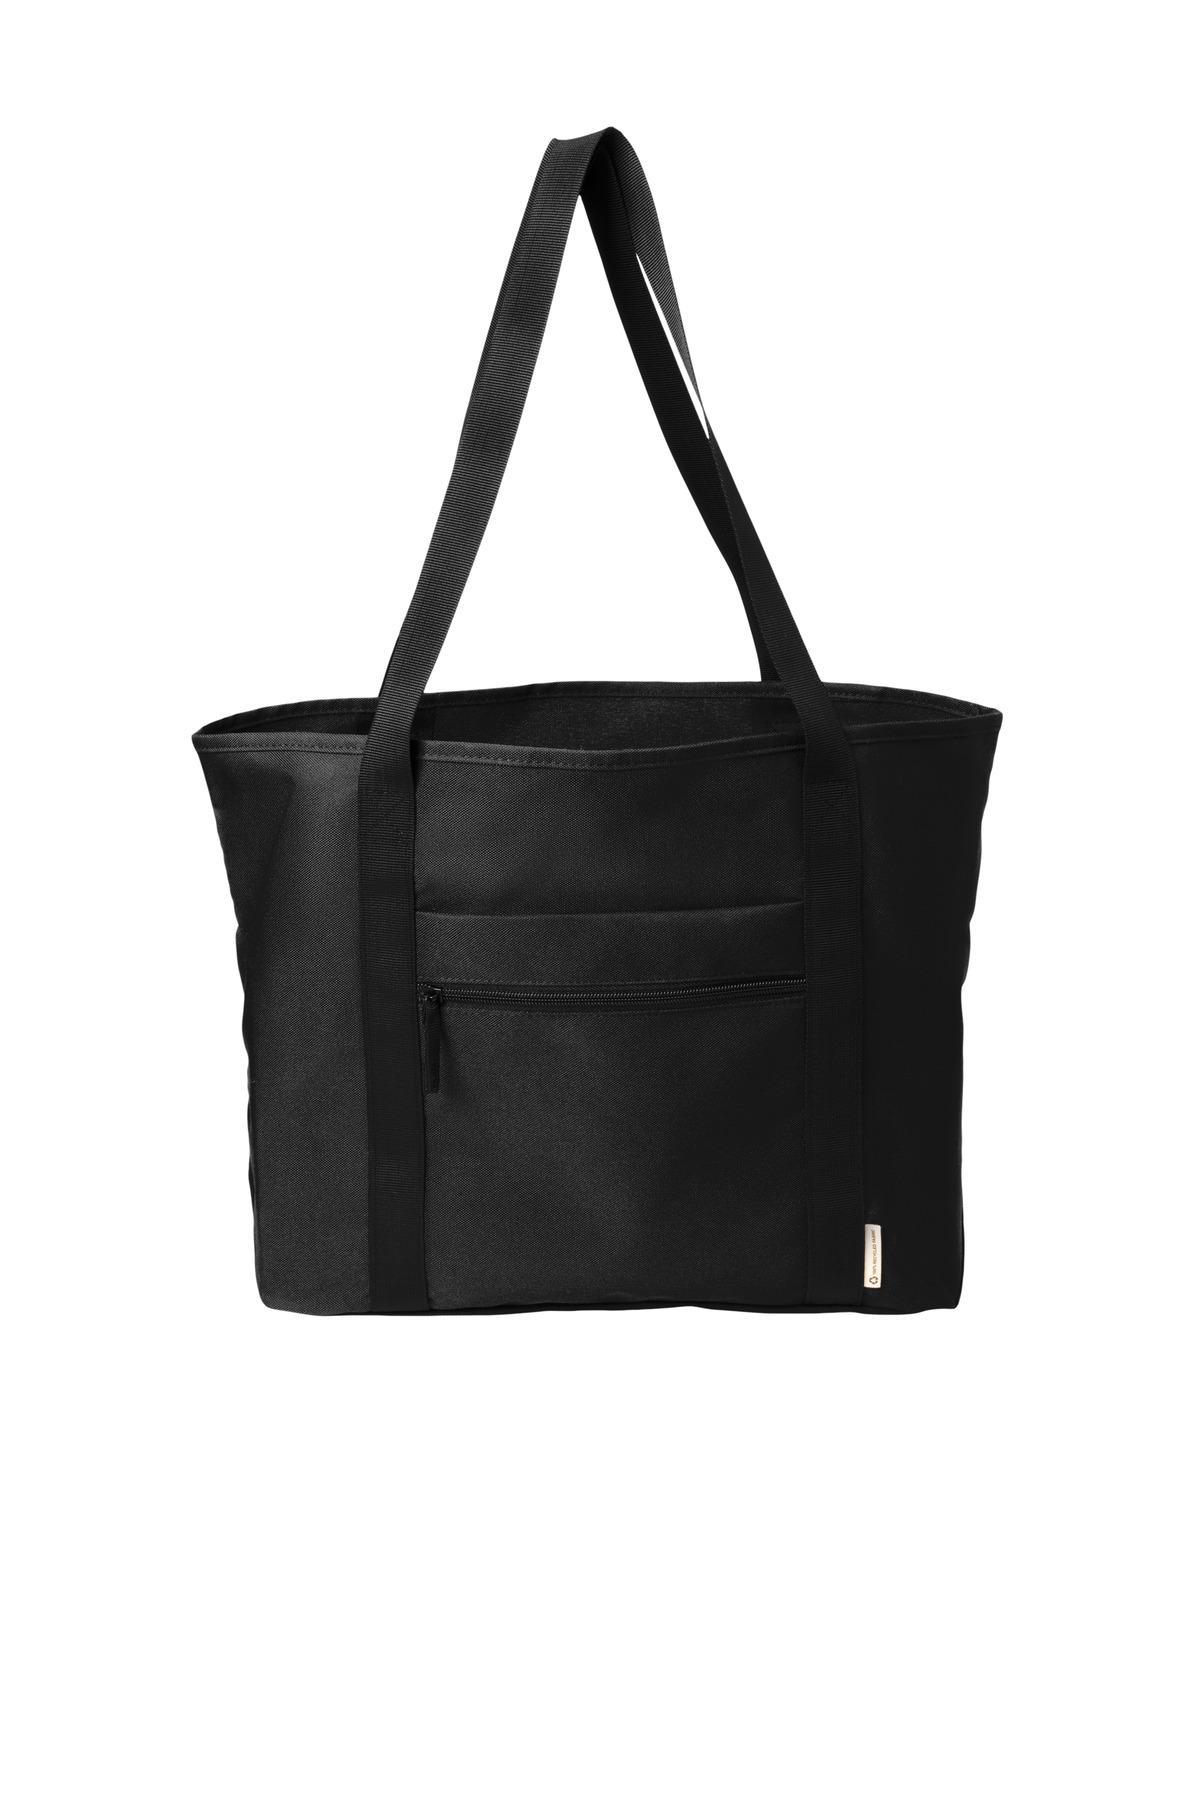 Port Authority C-FREE Recycled Tote-Port Authority